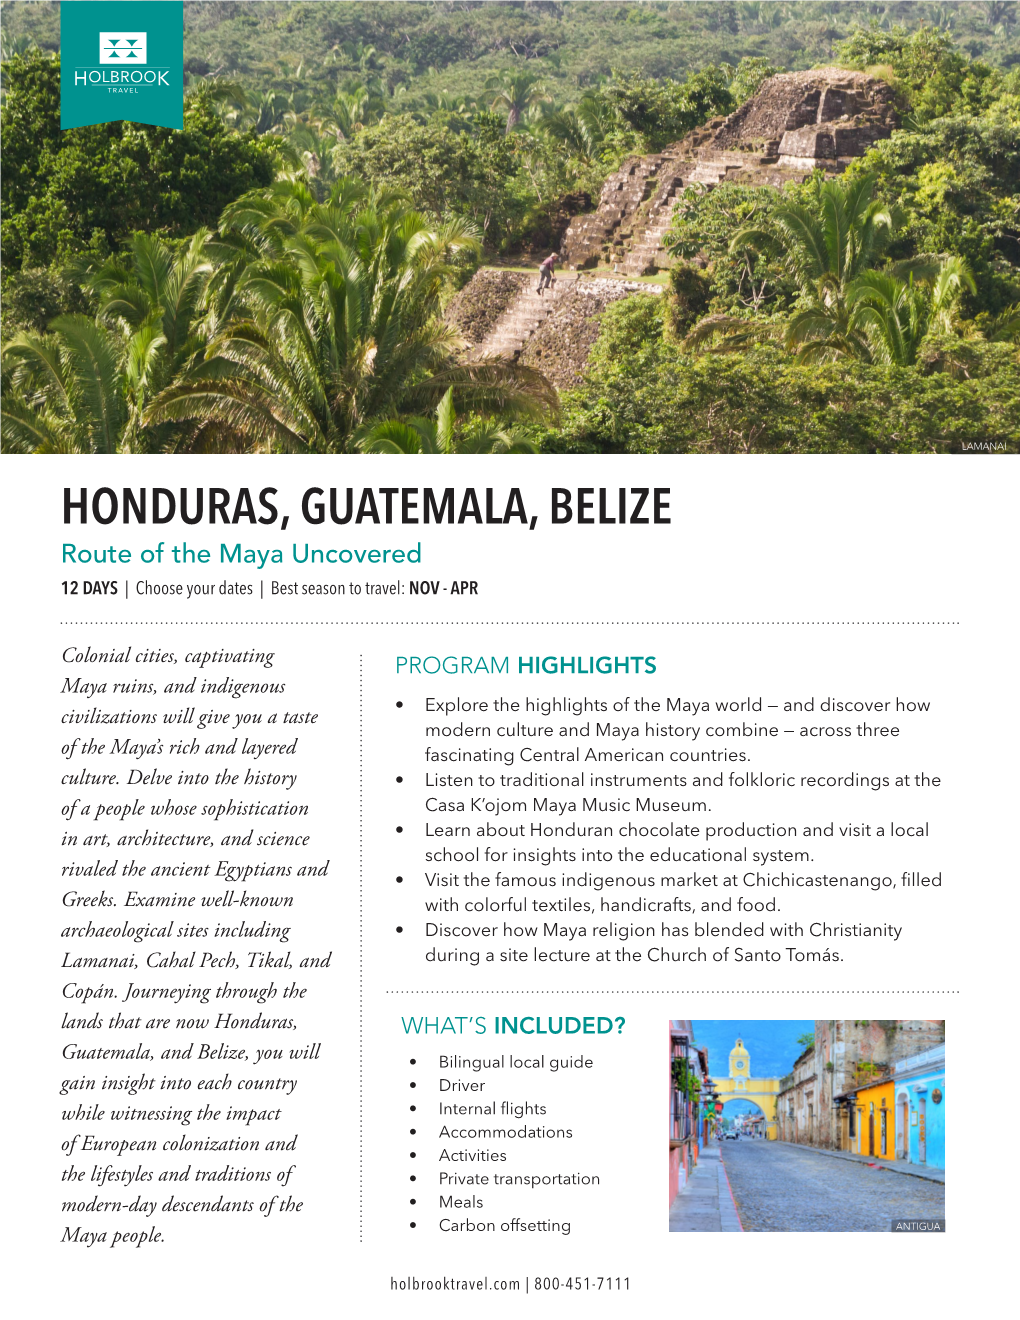 HONDURAS, GUATEMALA, BELIZE Route of the Maya Uncovered 12 DAYS | Choose Your Dates | Best Season to Travel: NOV - APR